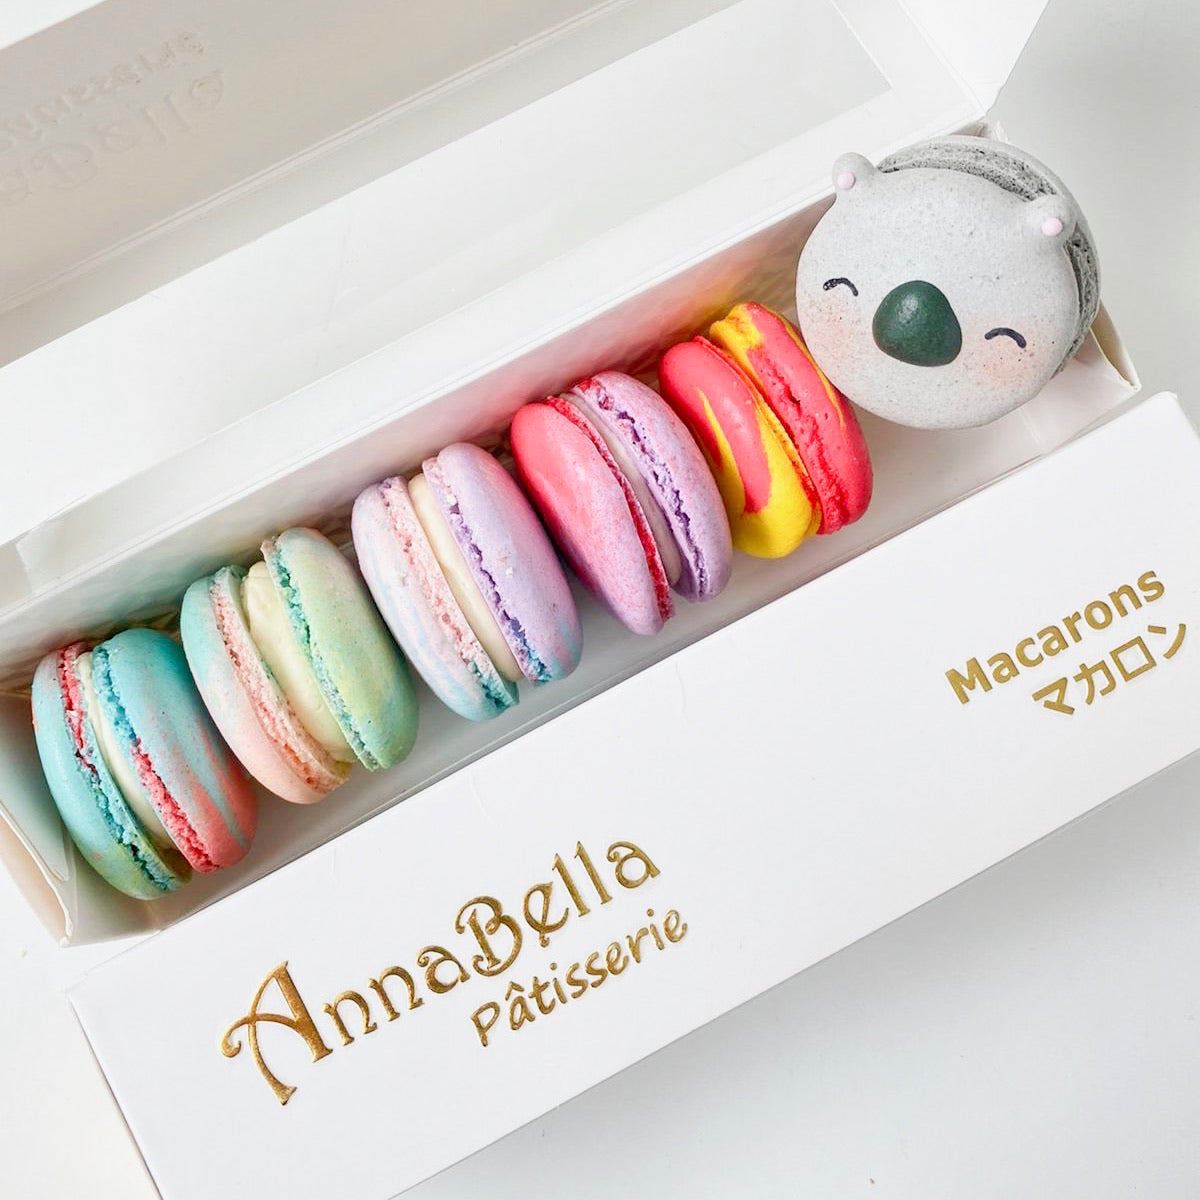 6PCS Macarons in Gift Box (Marvelous 1) | Special Price S$15.00